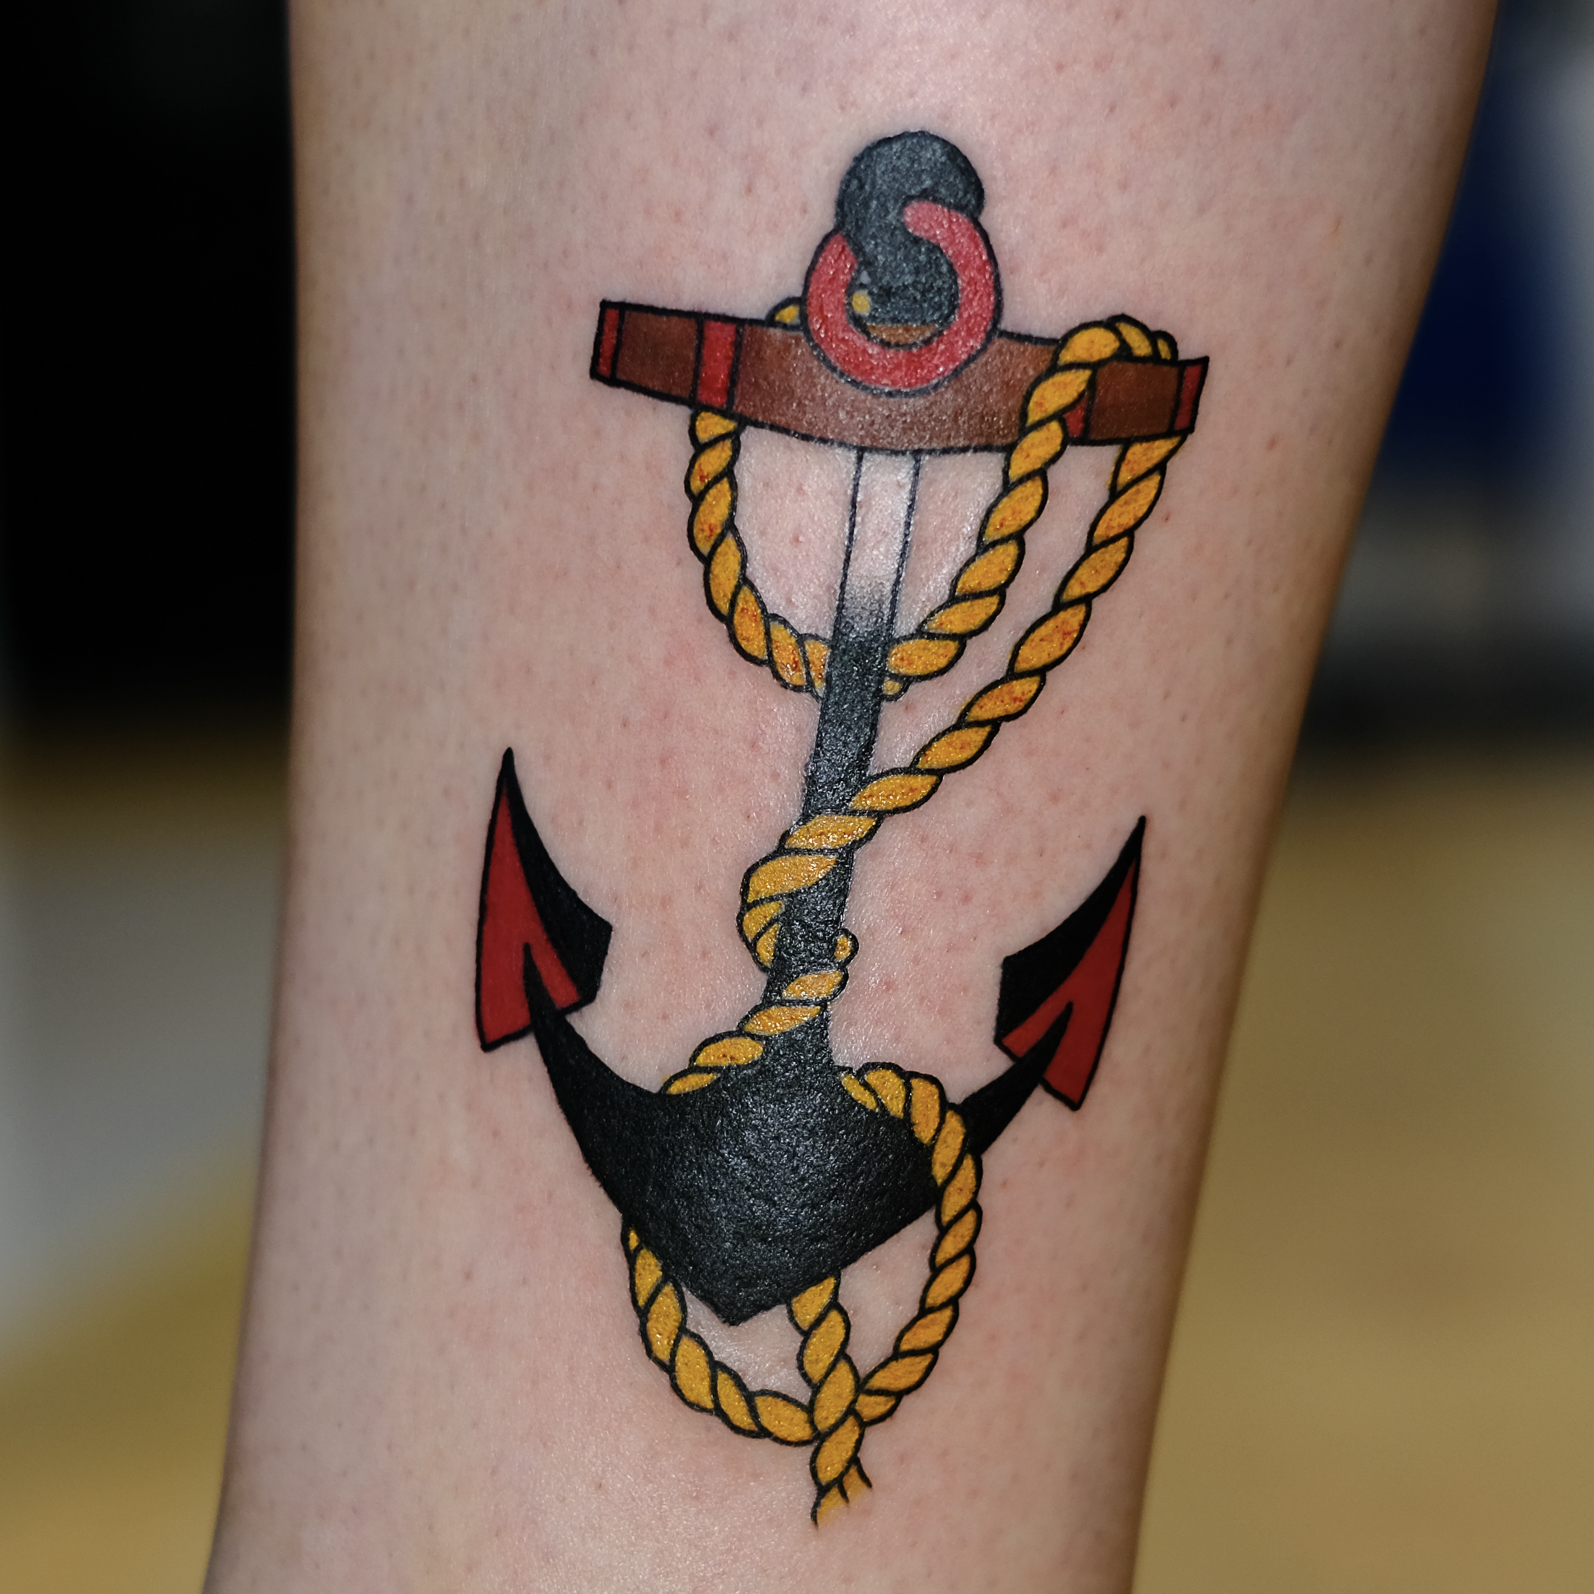 Sailor Jerry Anchor Tattoo by courtneychronic on DeviantArt